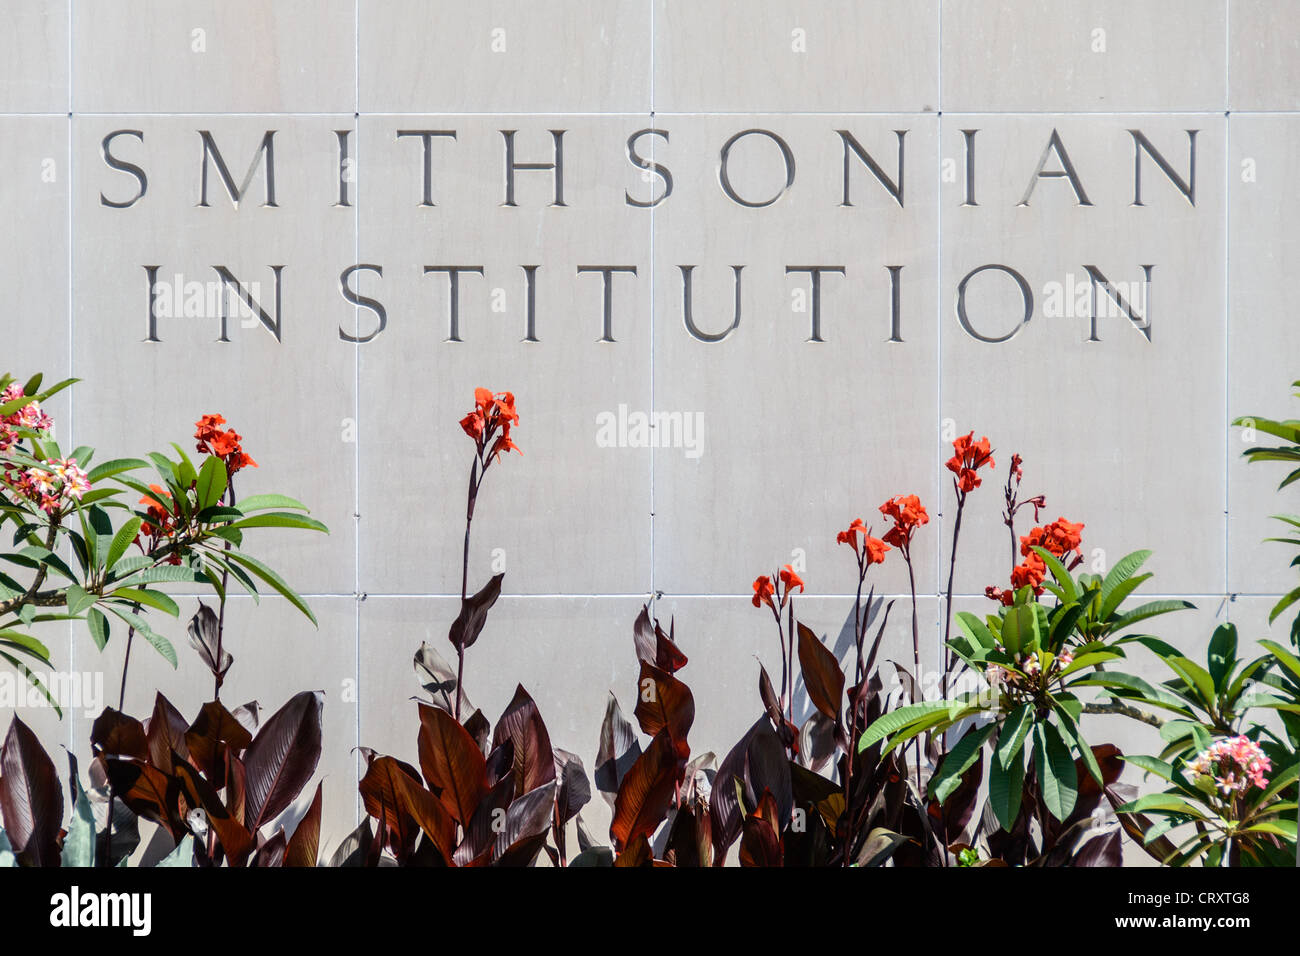 WASHINGTON DC, USA - Smithsonian National Museum of American History Sign and Flowers. The word's 'Smithsonian institution' etched into the granite walls of the Smithsonian National Museum of American History in Washington DC. This sign, on the Mall side of the building, is framed by a small flower garden. Stock Photo